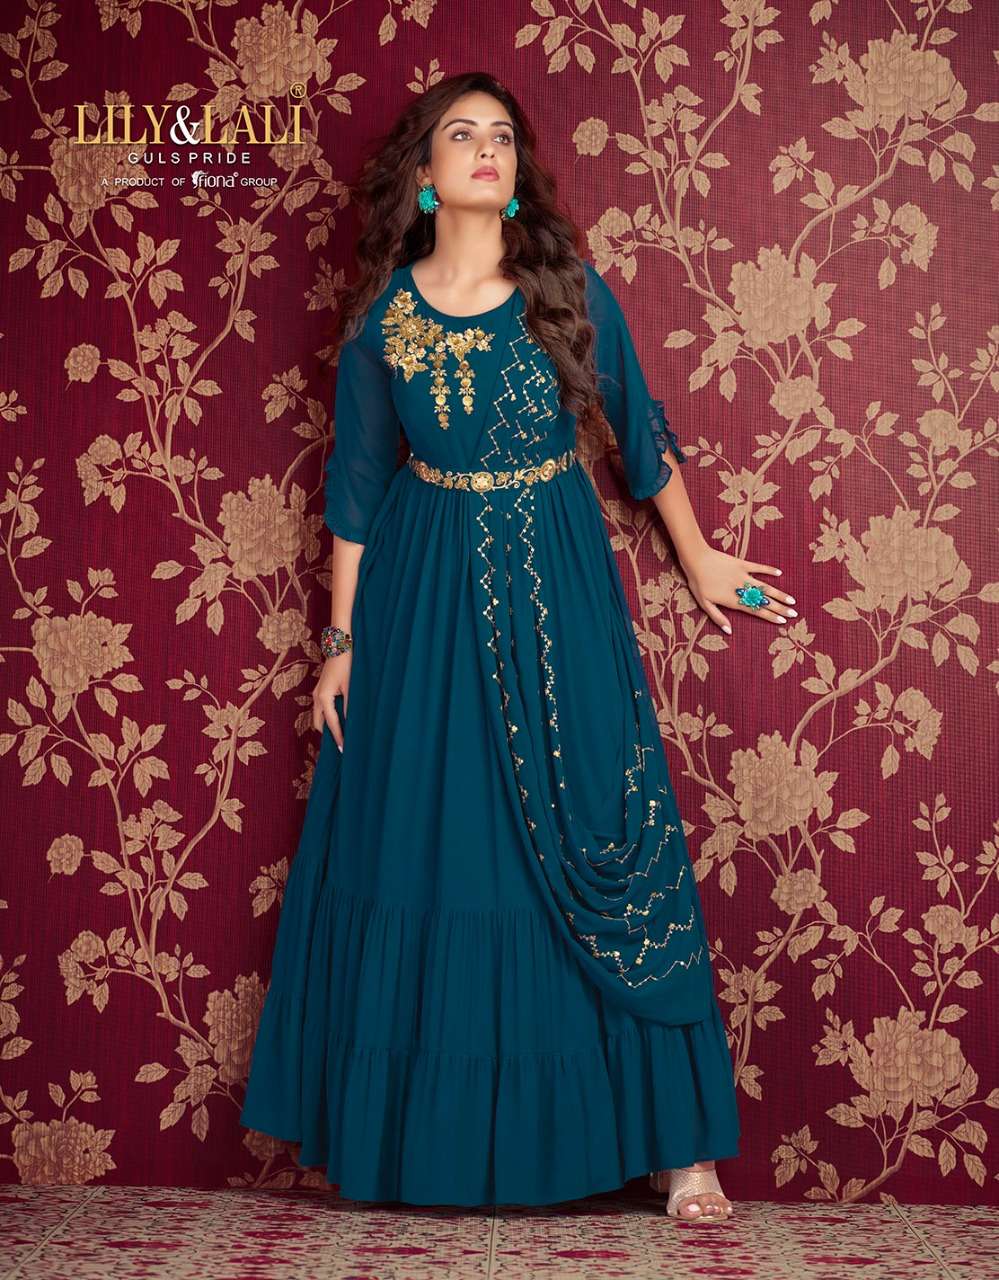 lily&lali rosette 10131-10136 series georgette exclusive ready made party wear gown collection wholesale dealer surat